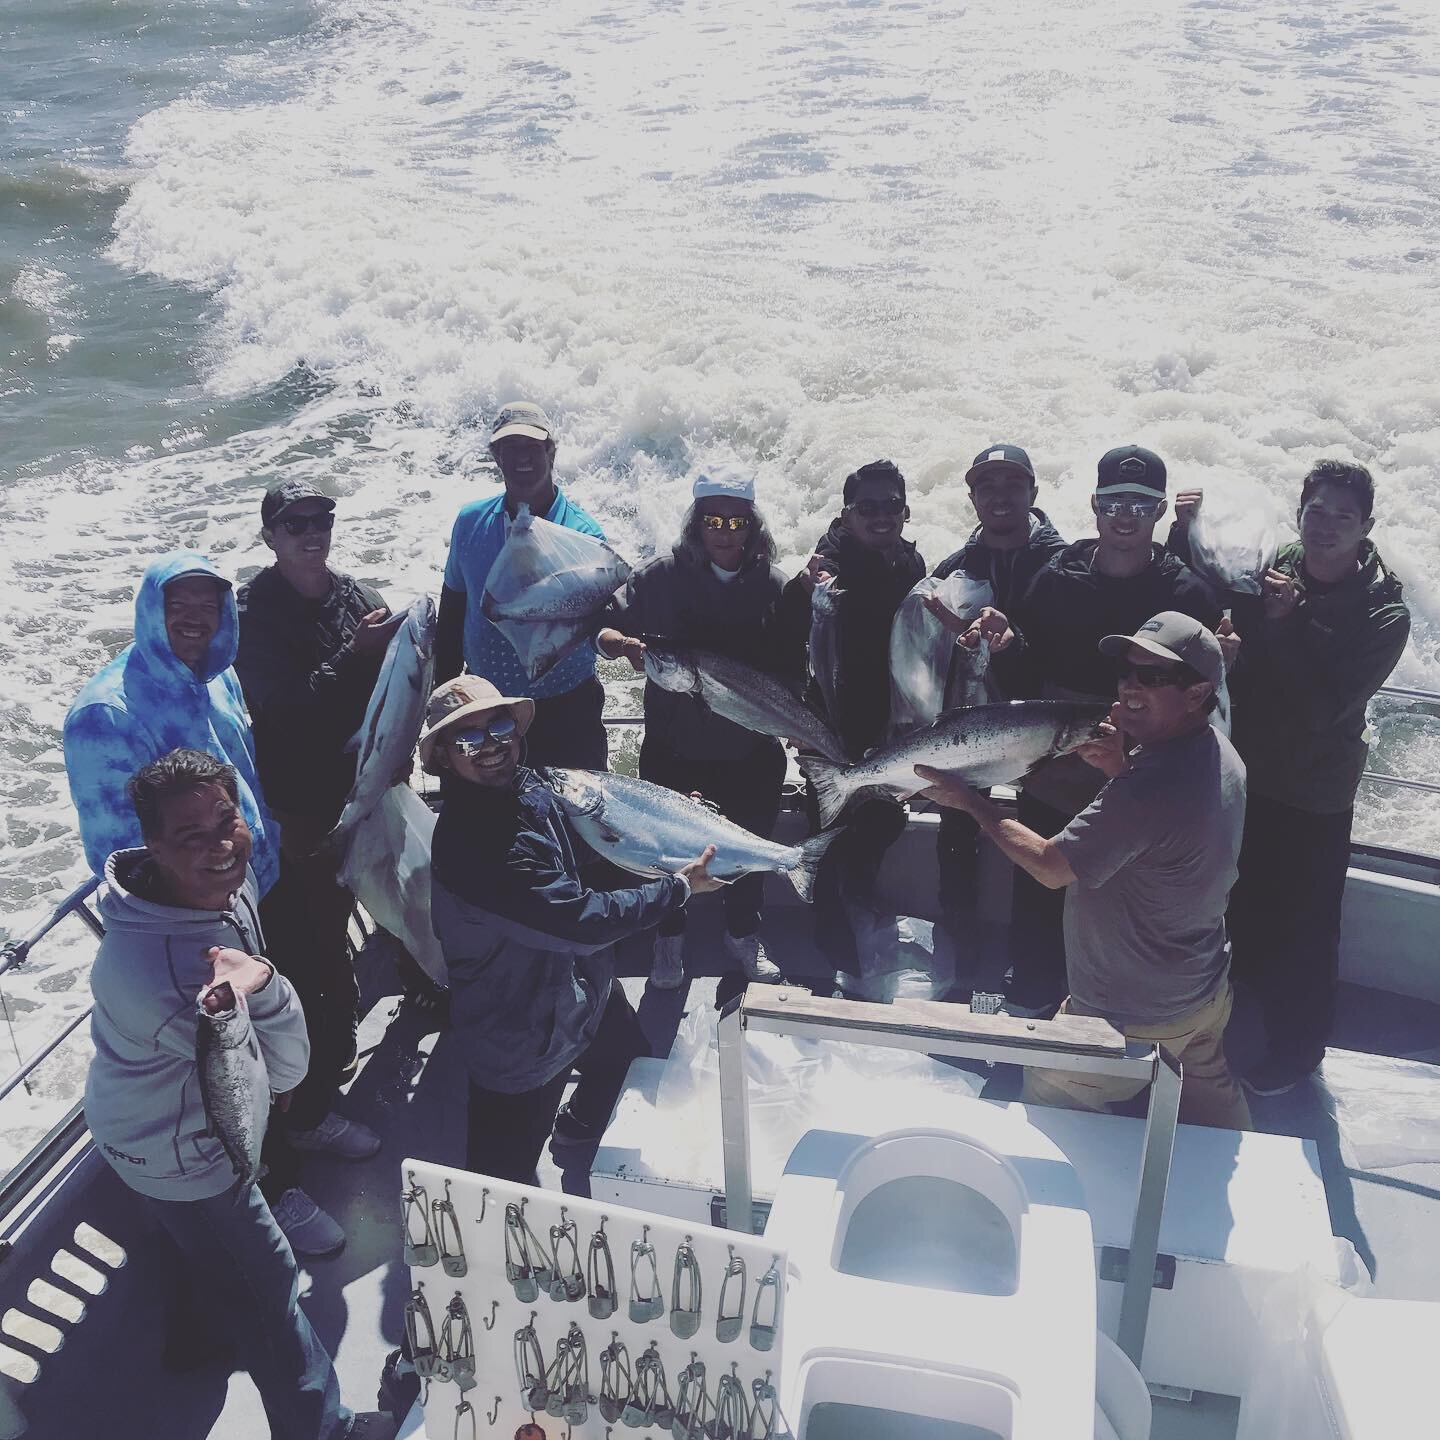 Late post! Beautiful day on the big pond! Our 11 anglers landed 17 salmon to 18 lbs! Lots of action today and lots of grass!! We ran the gear about every 4 mins and we got rewarded! #fishemeryville #pacificpearlcharters.com #salmon #sfbayareafishing 